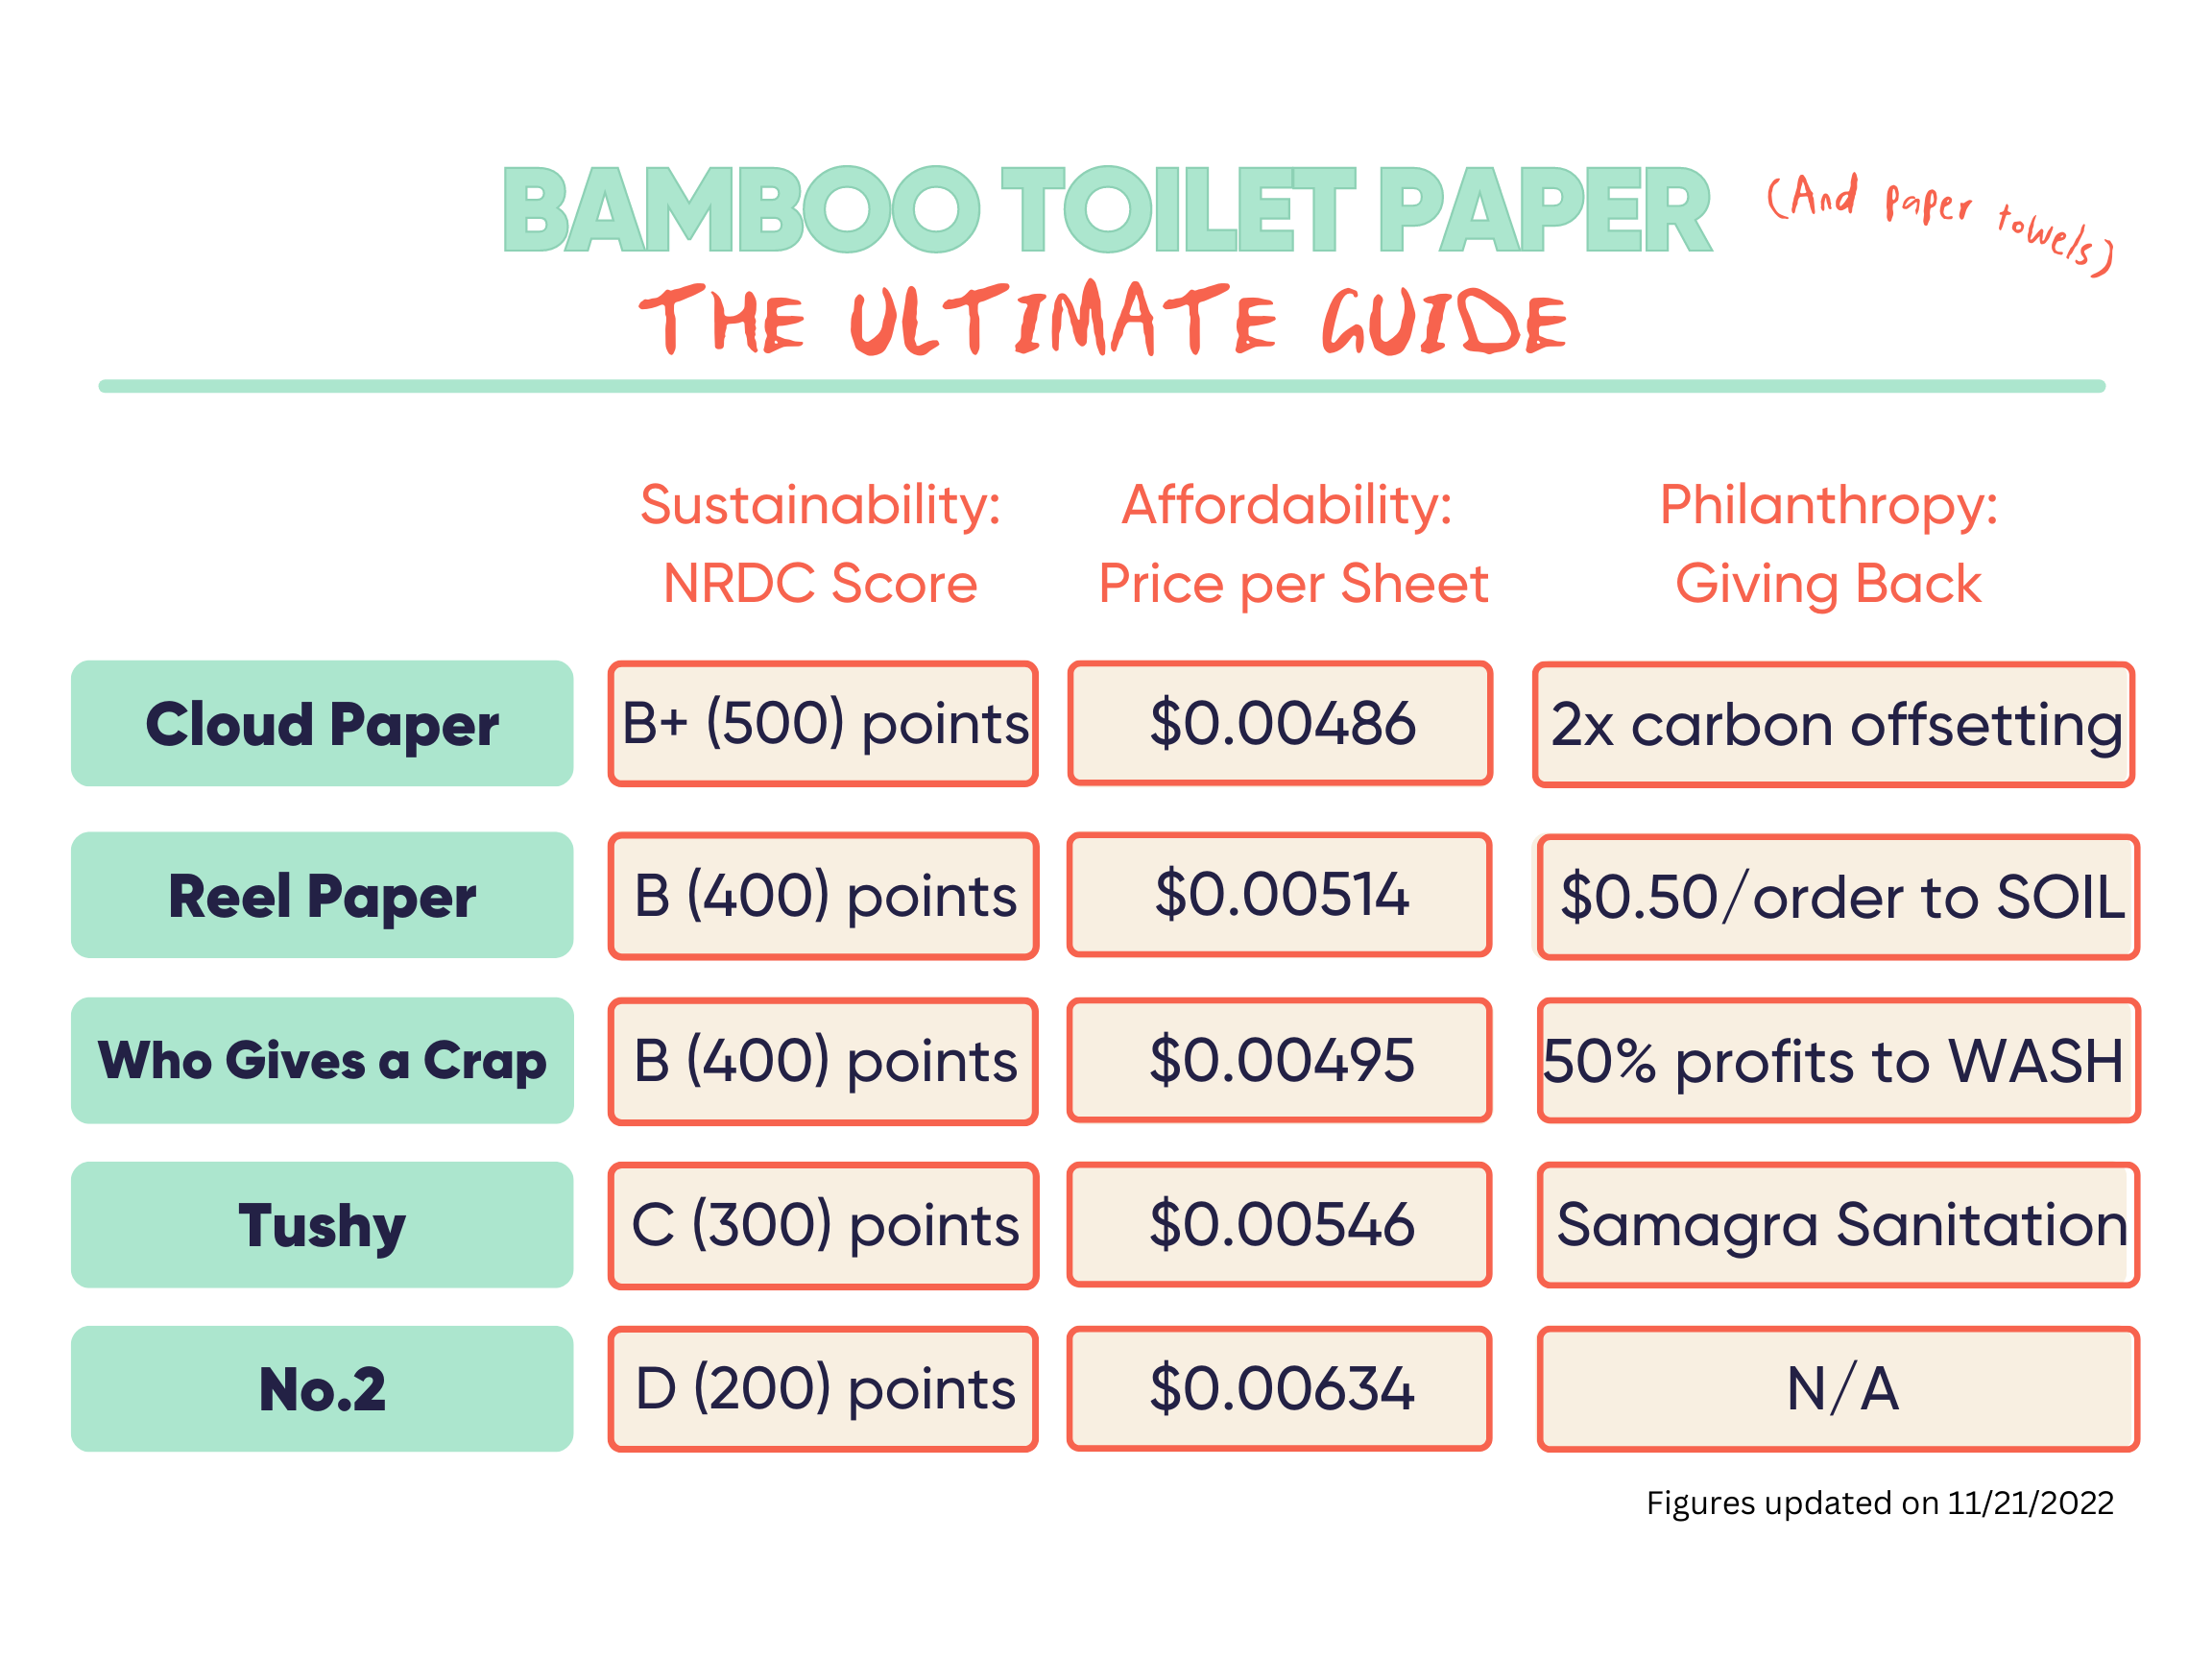 What's the Best Bamboo Toilet Paper? – Cloud Paper